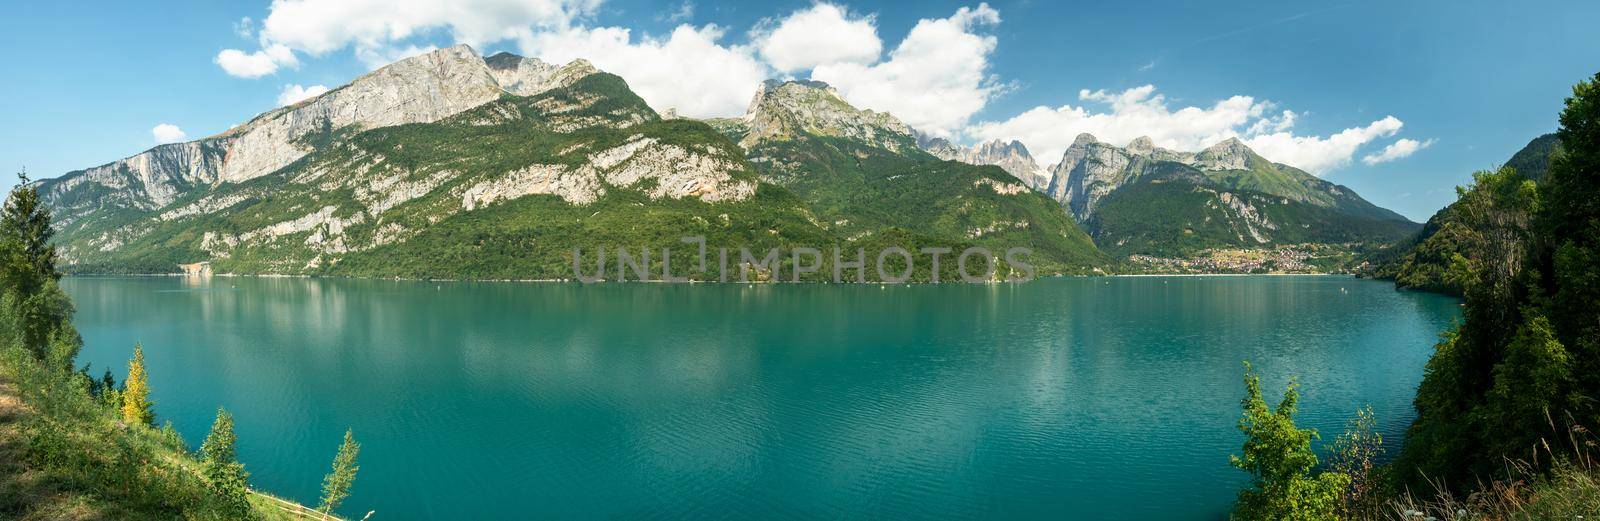 Panoramic view to the Lake Molveno in Trentino region. by rdonar2